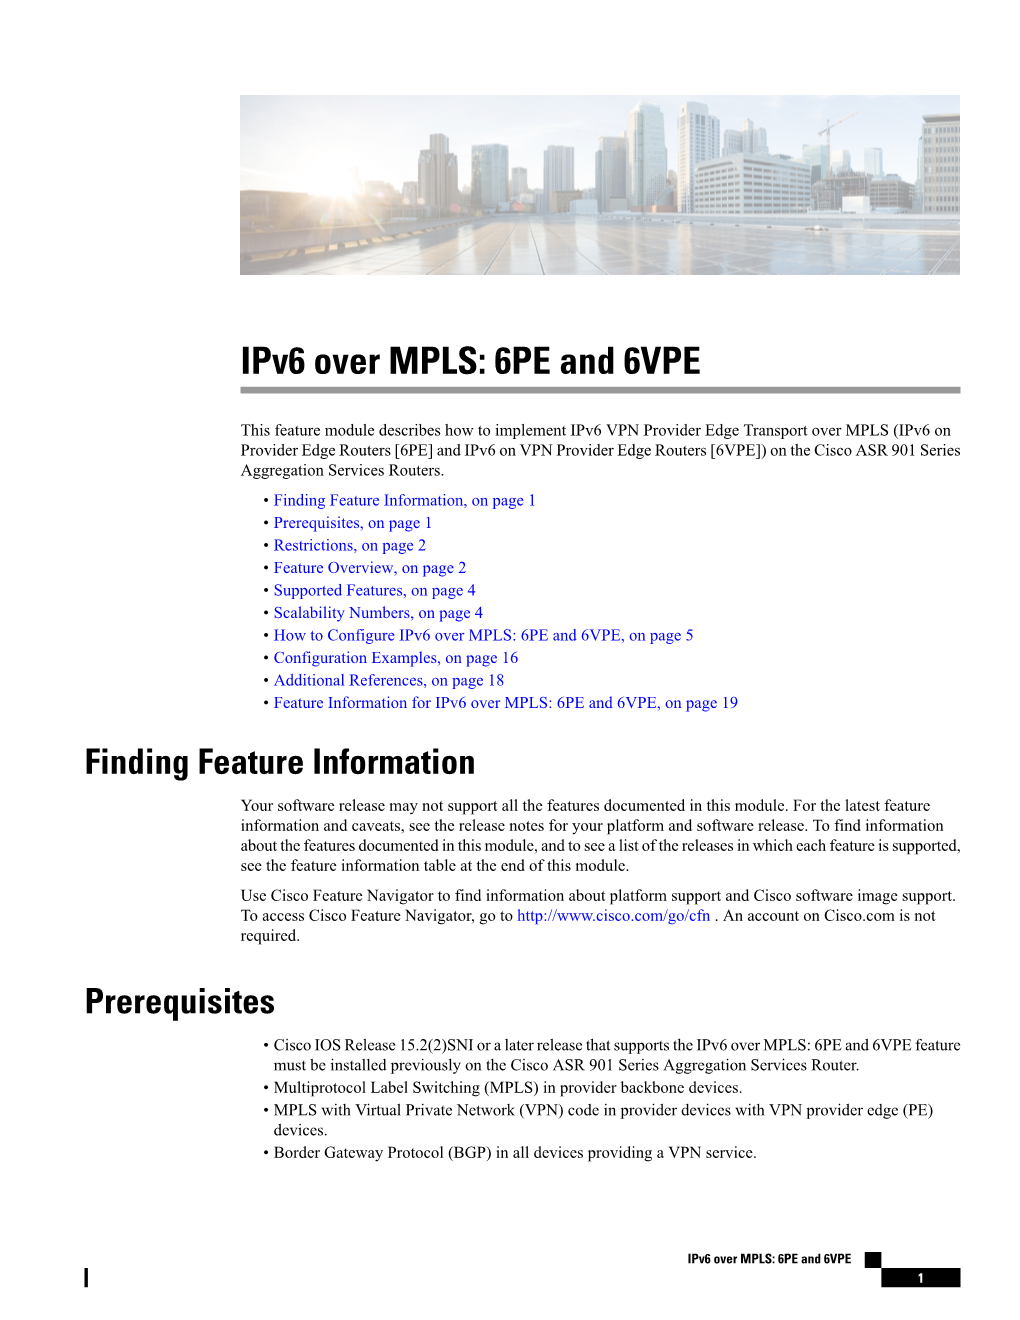 Ipv6 Over MPLS: 6PE and 6VPE